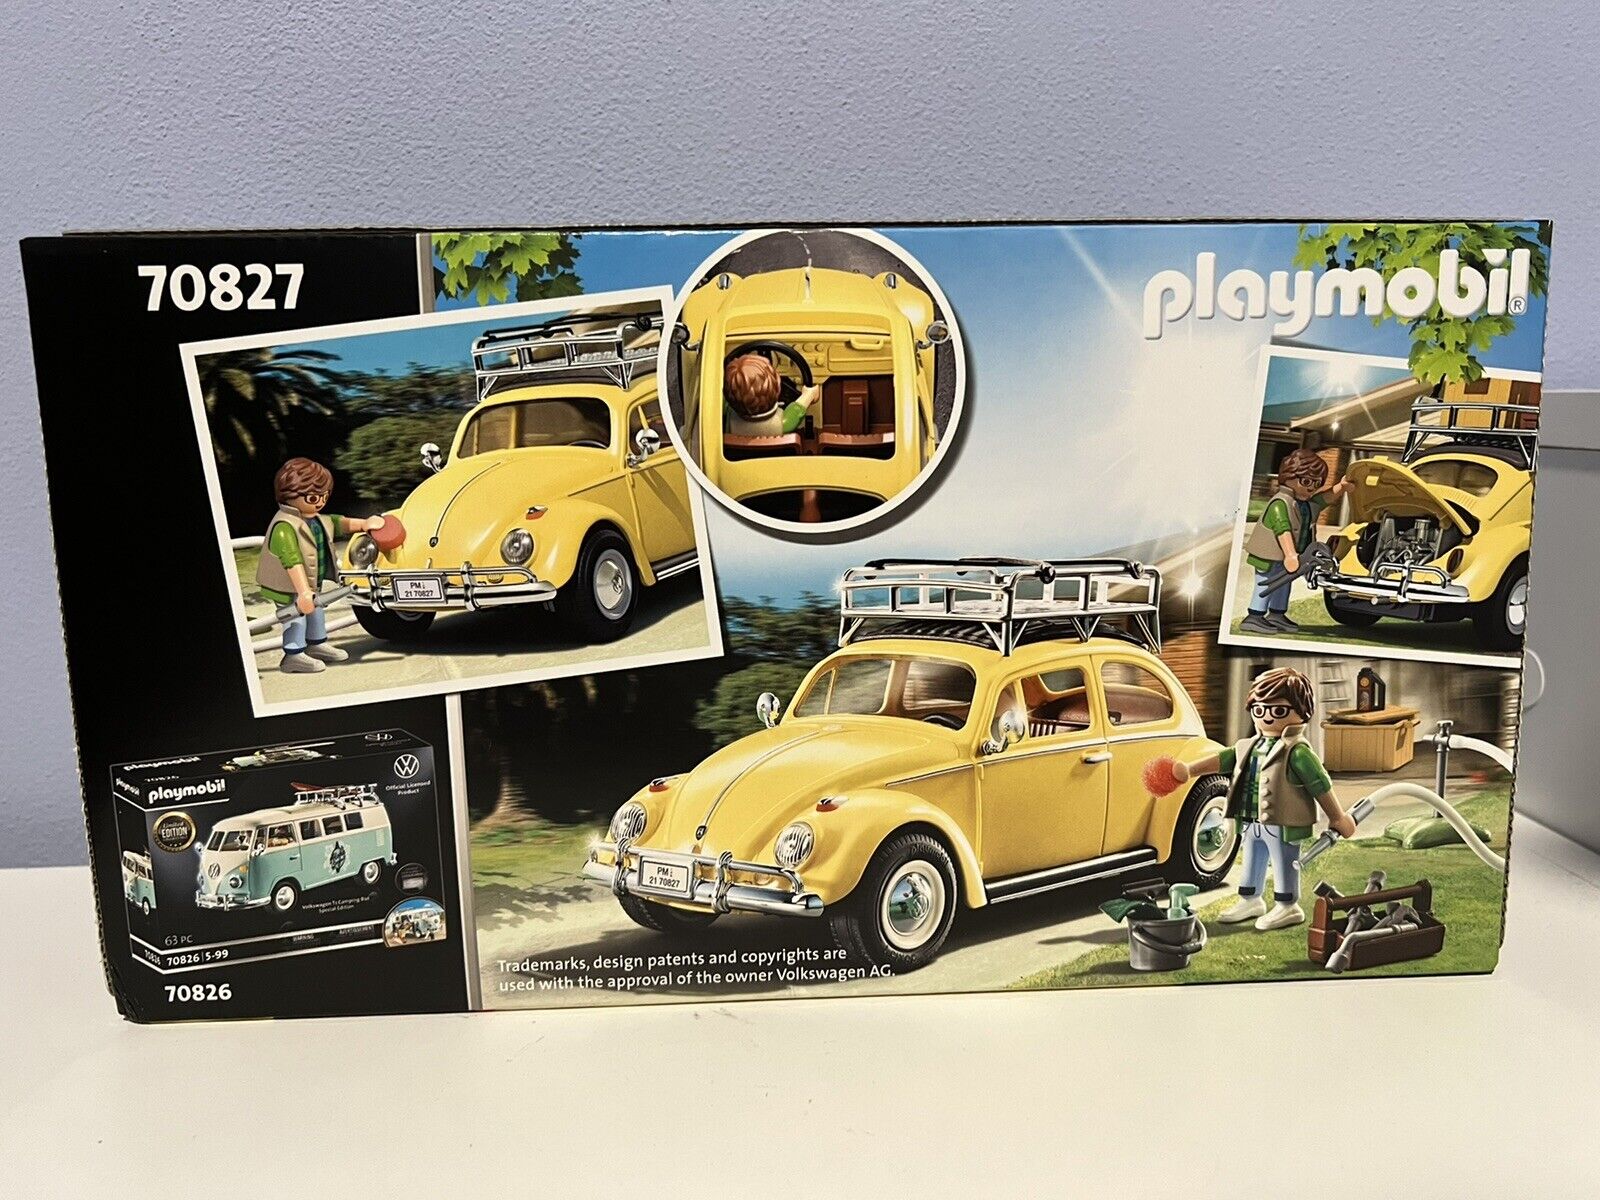 Playmobil-70827-limited-edition-collectible-Volkswagen-Beetle-New-144778984828-2